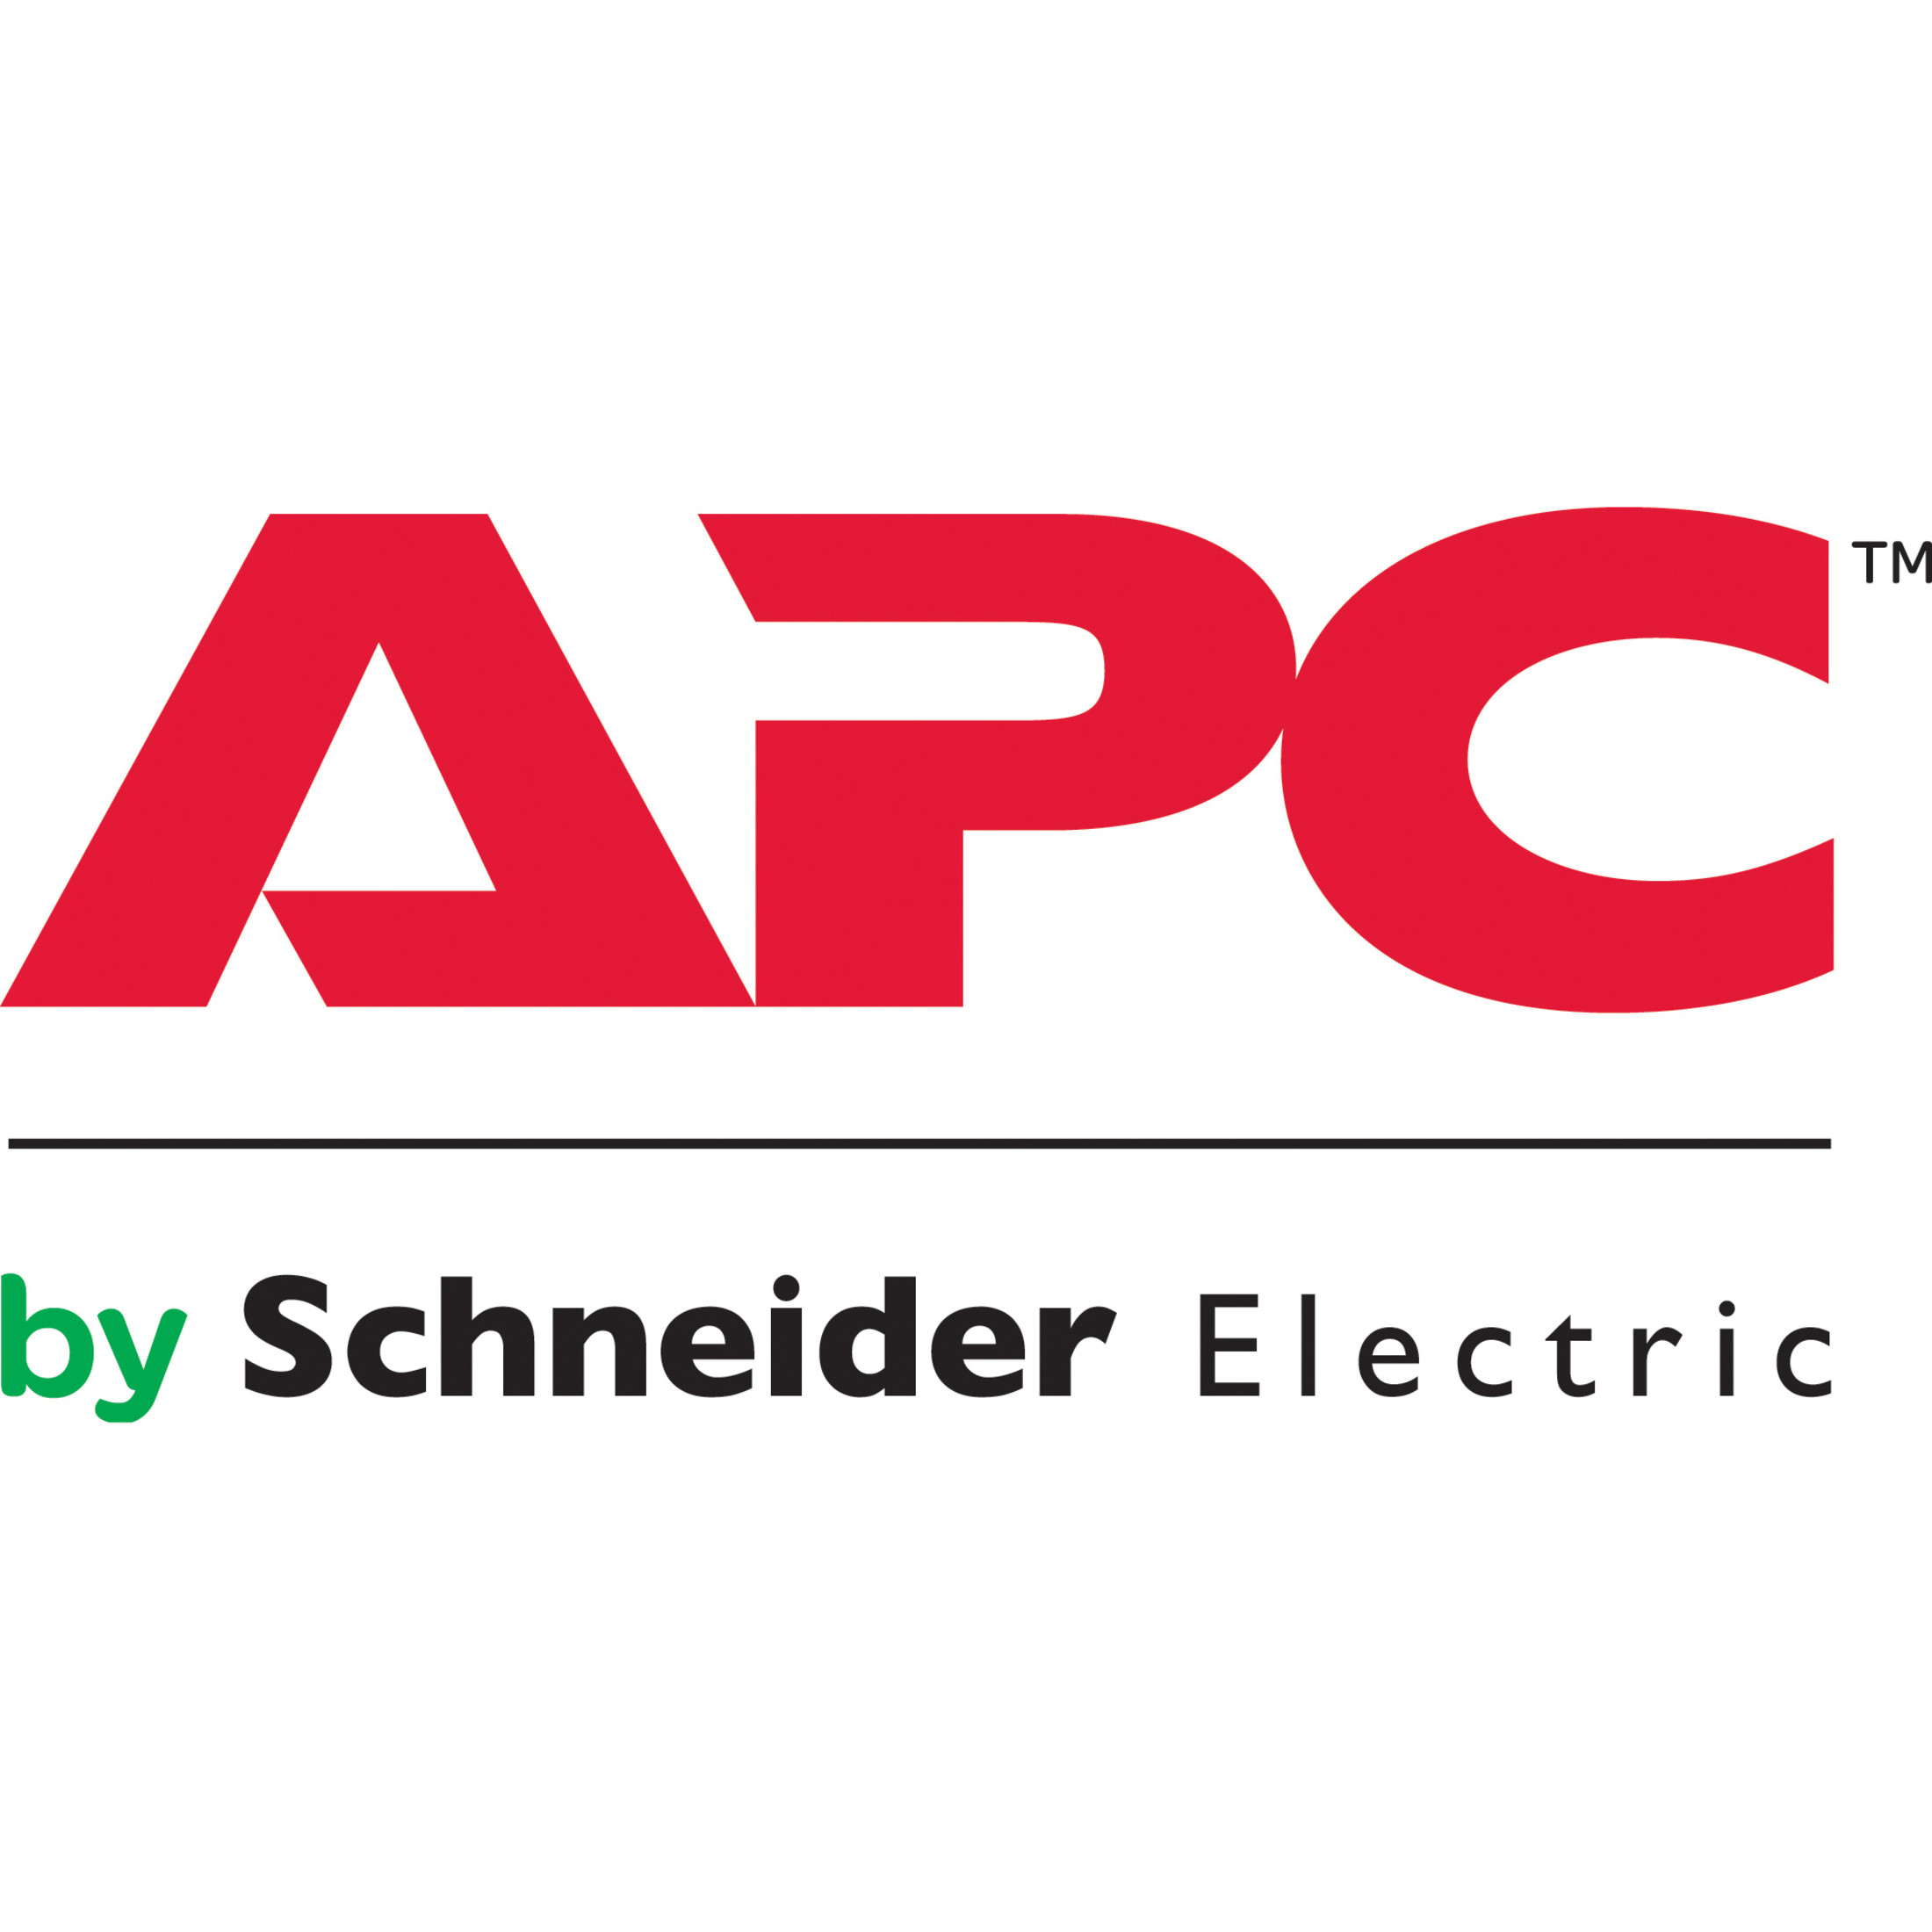 APC by Schneider Electric Assembly ServiceService8 x 5InstallationLaborElectronic and Physical WASSEM-VX-62